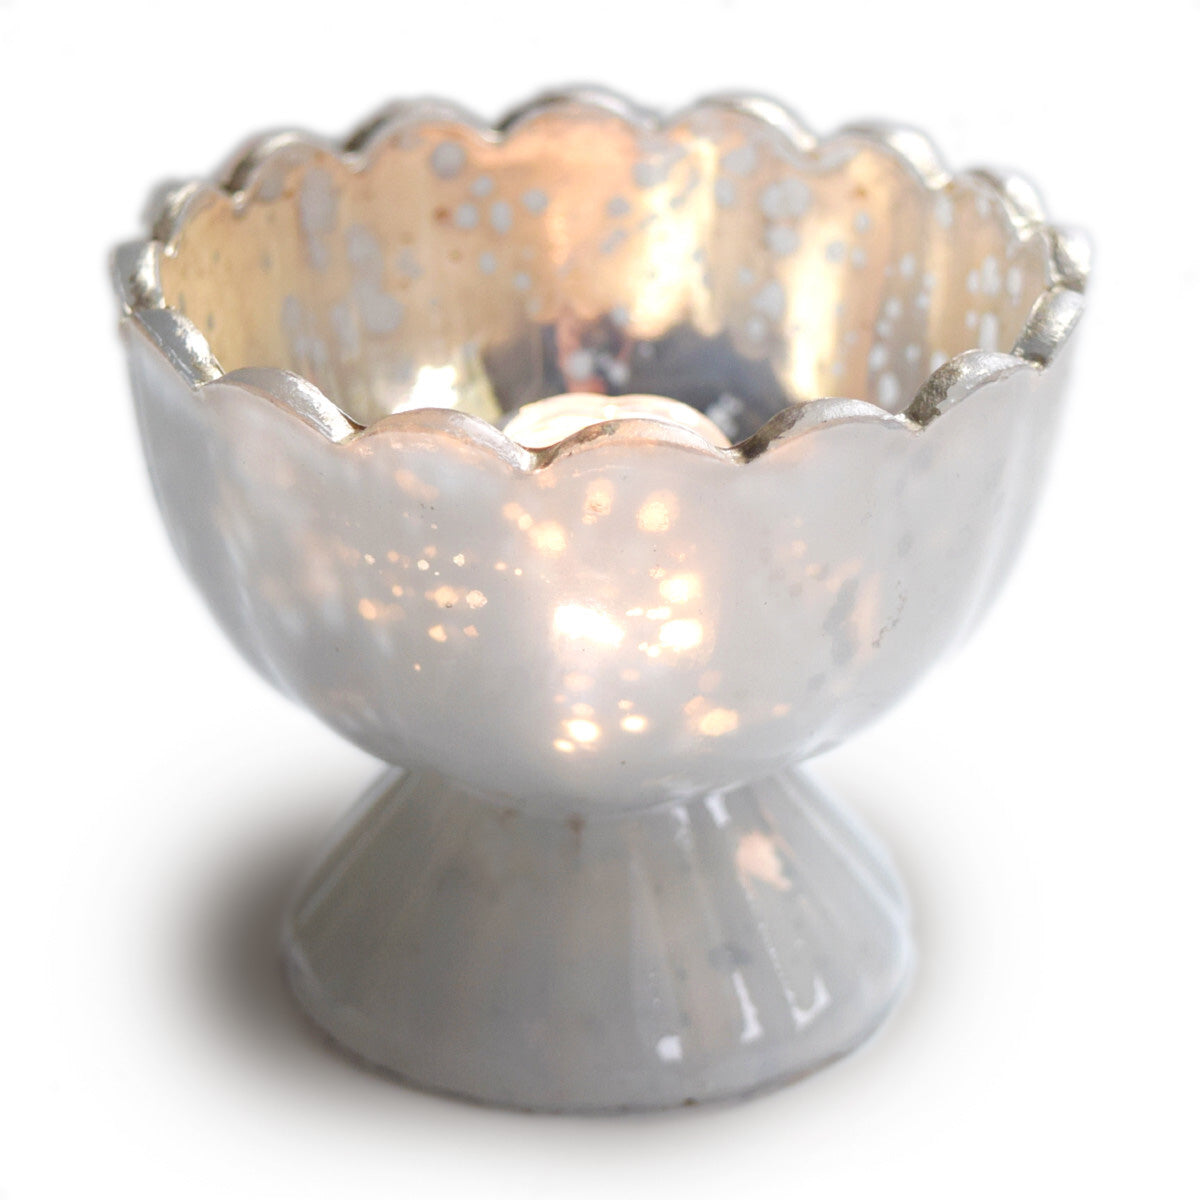 Vintage Mercury Glass Candle Holder (3-Inch, Suzanne Design, Sundae Cup Motif, Pearl White) - For Use with Tea Lights - Home Decor and Wedding Decorations